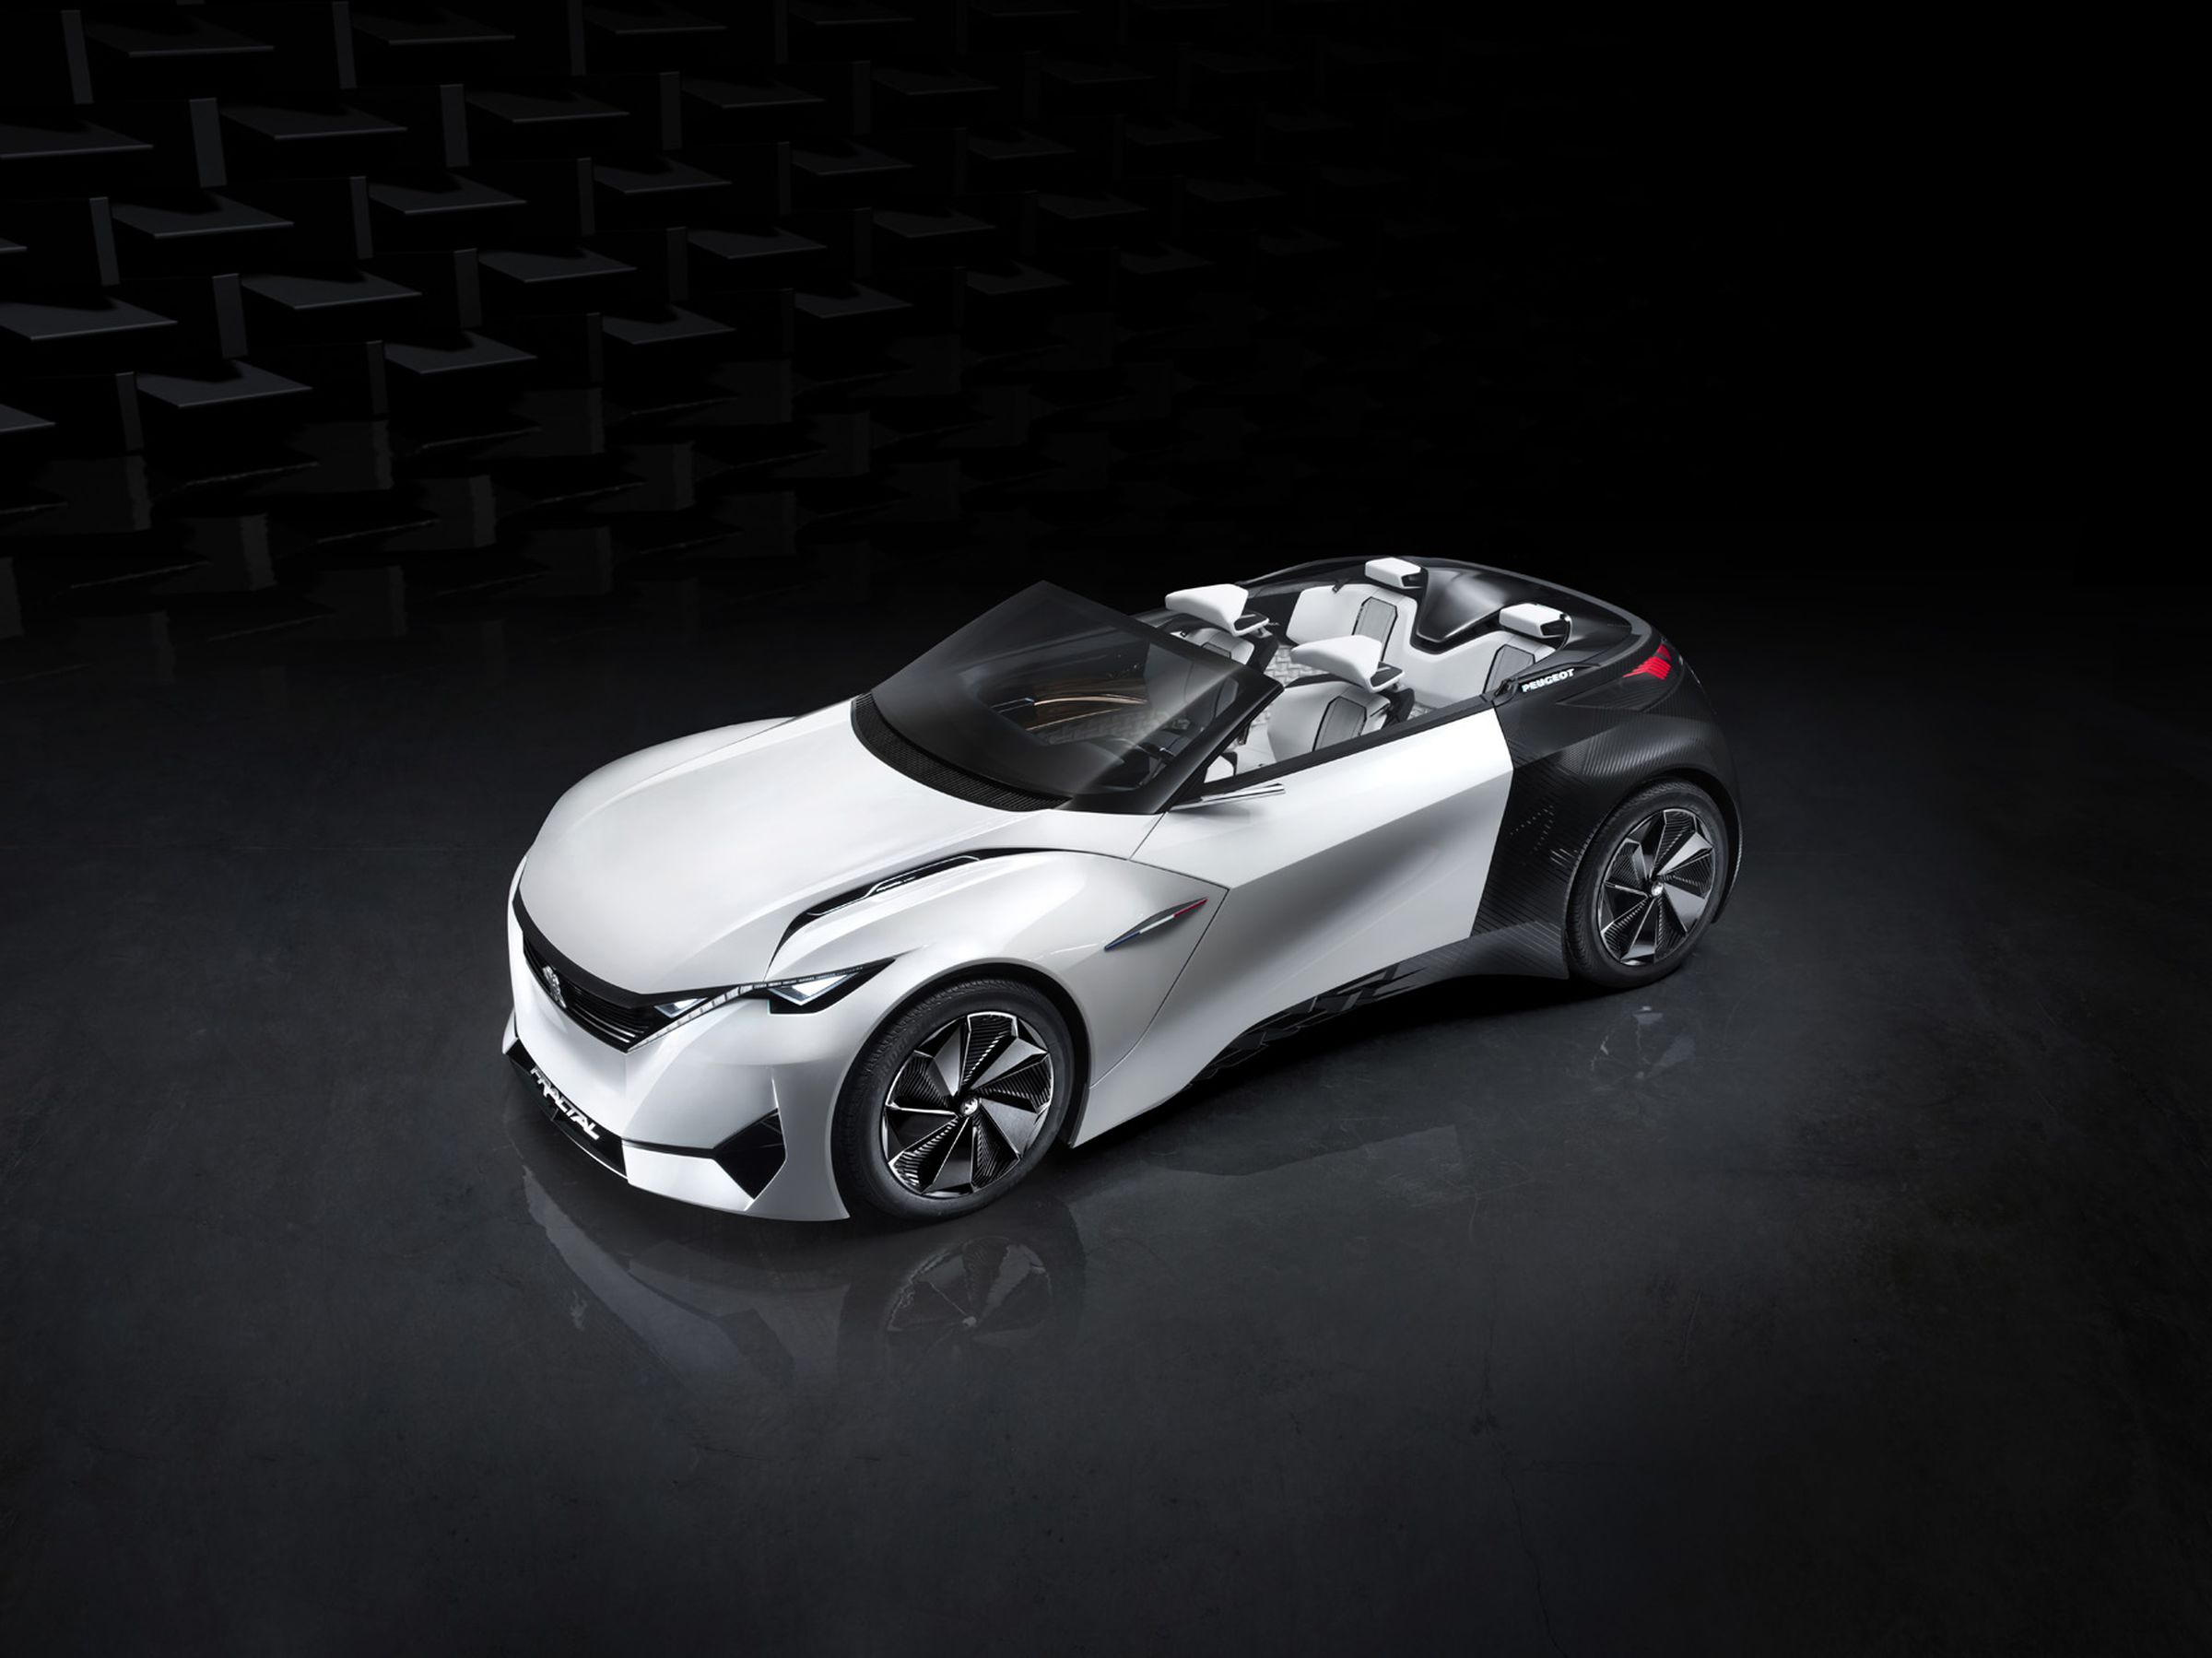 The Peugeot Fractal concept, unveiled in 2015 as a car “designed by sound,” hinted at the experiential design that guided development of the Instinct.